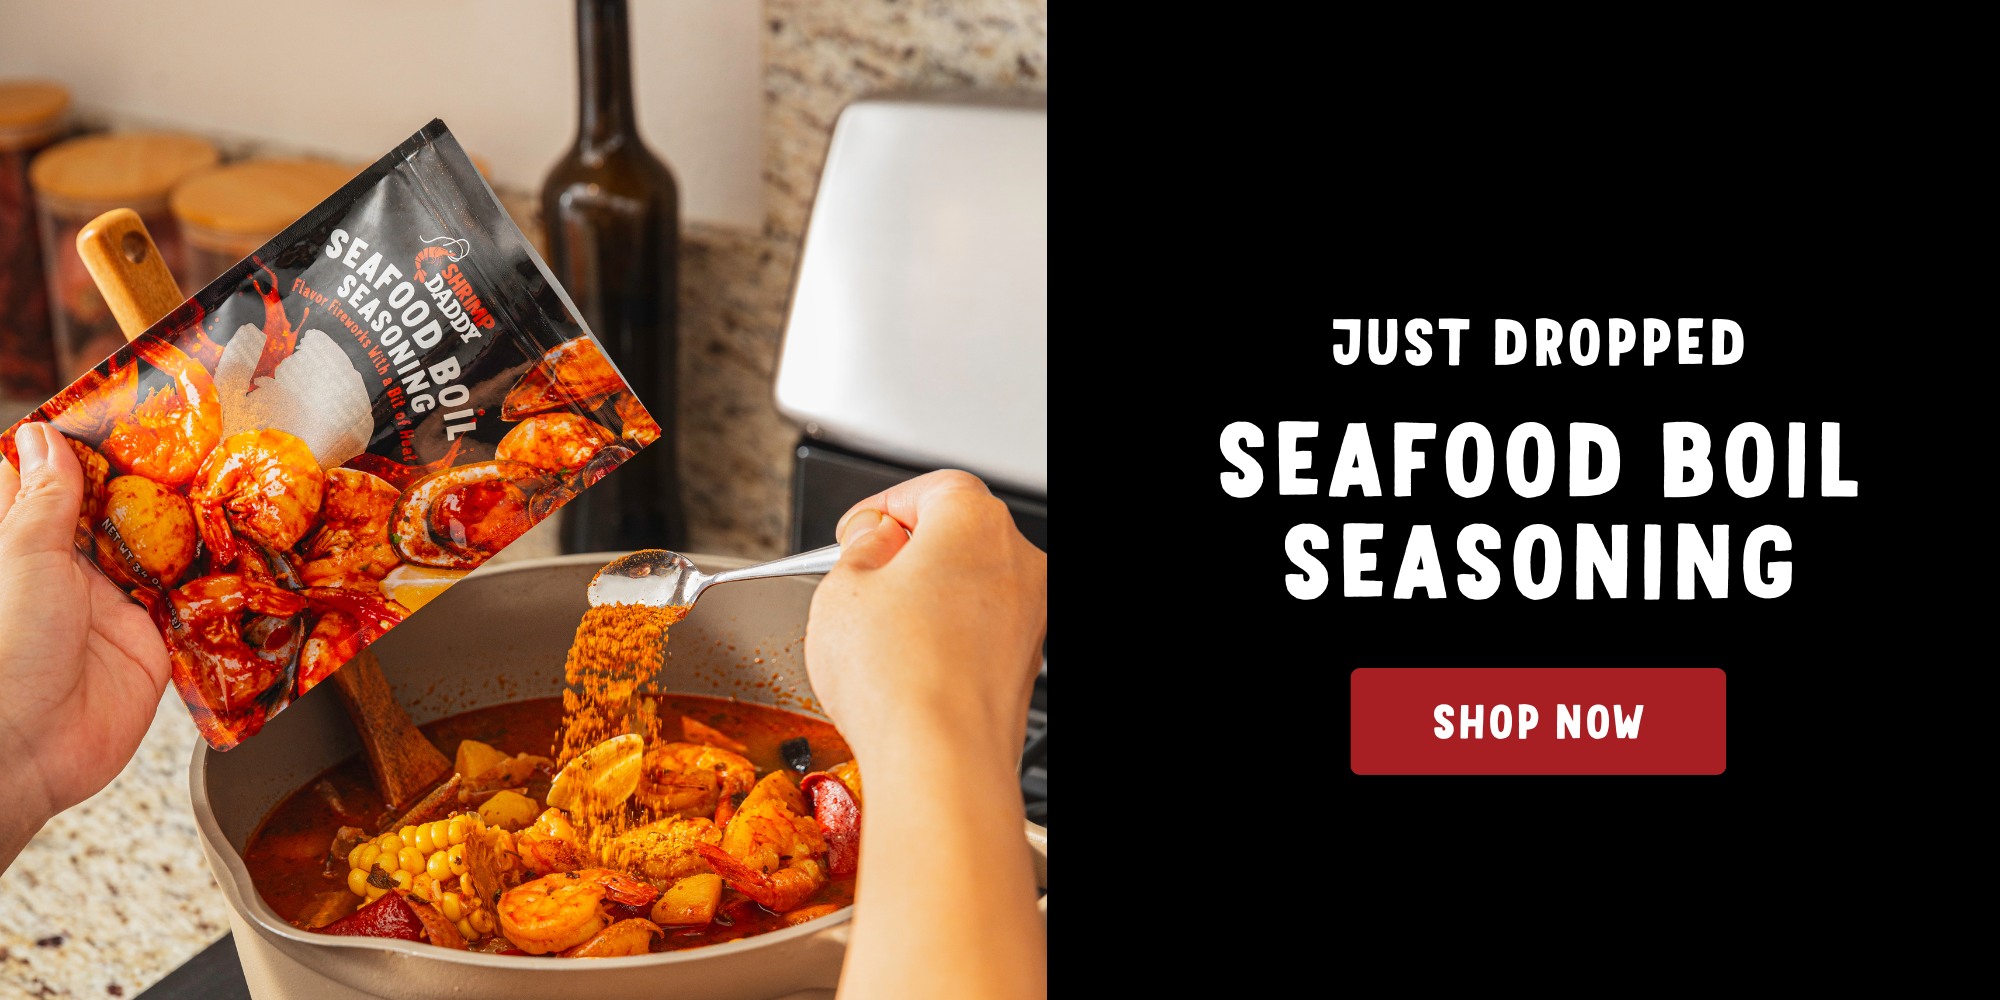 Just Dropped: Seafood Boil Seasoning, Shop Now